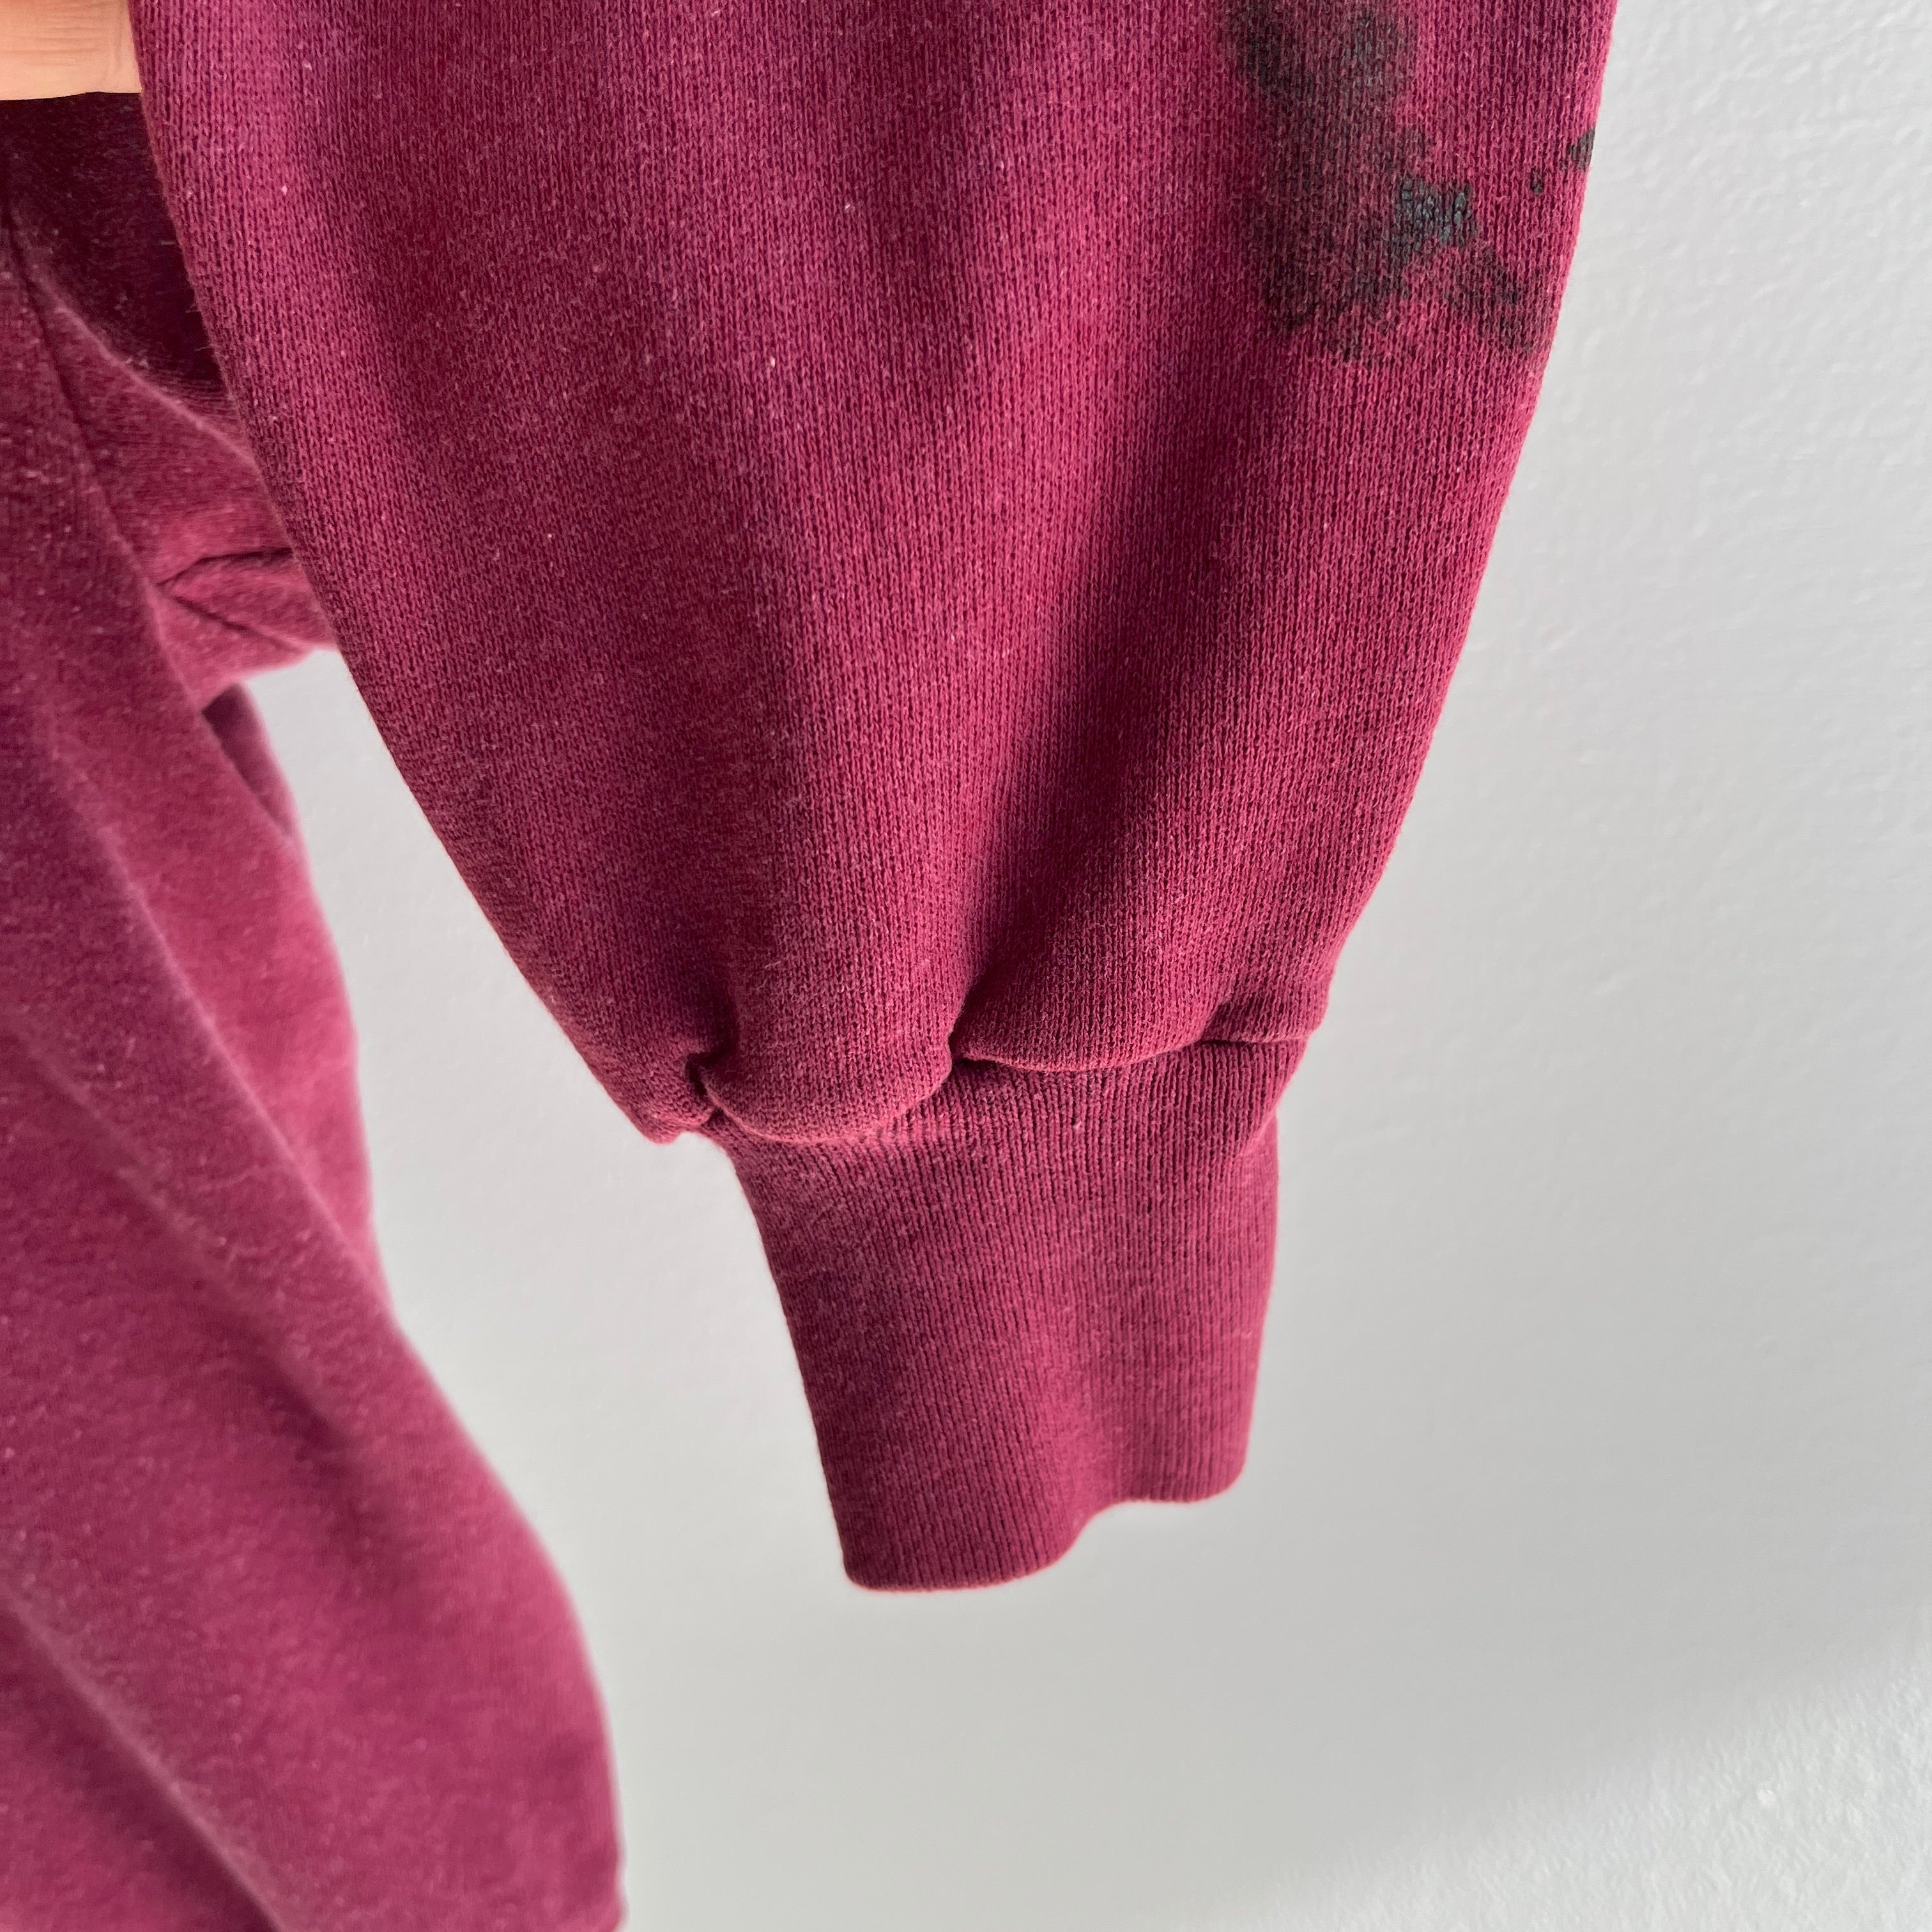 1980s Sweet Smaller Faded Burgundy Zip Up Hoodie with Tar Staining